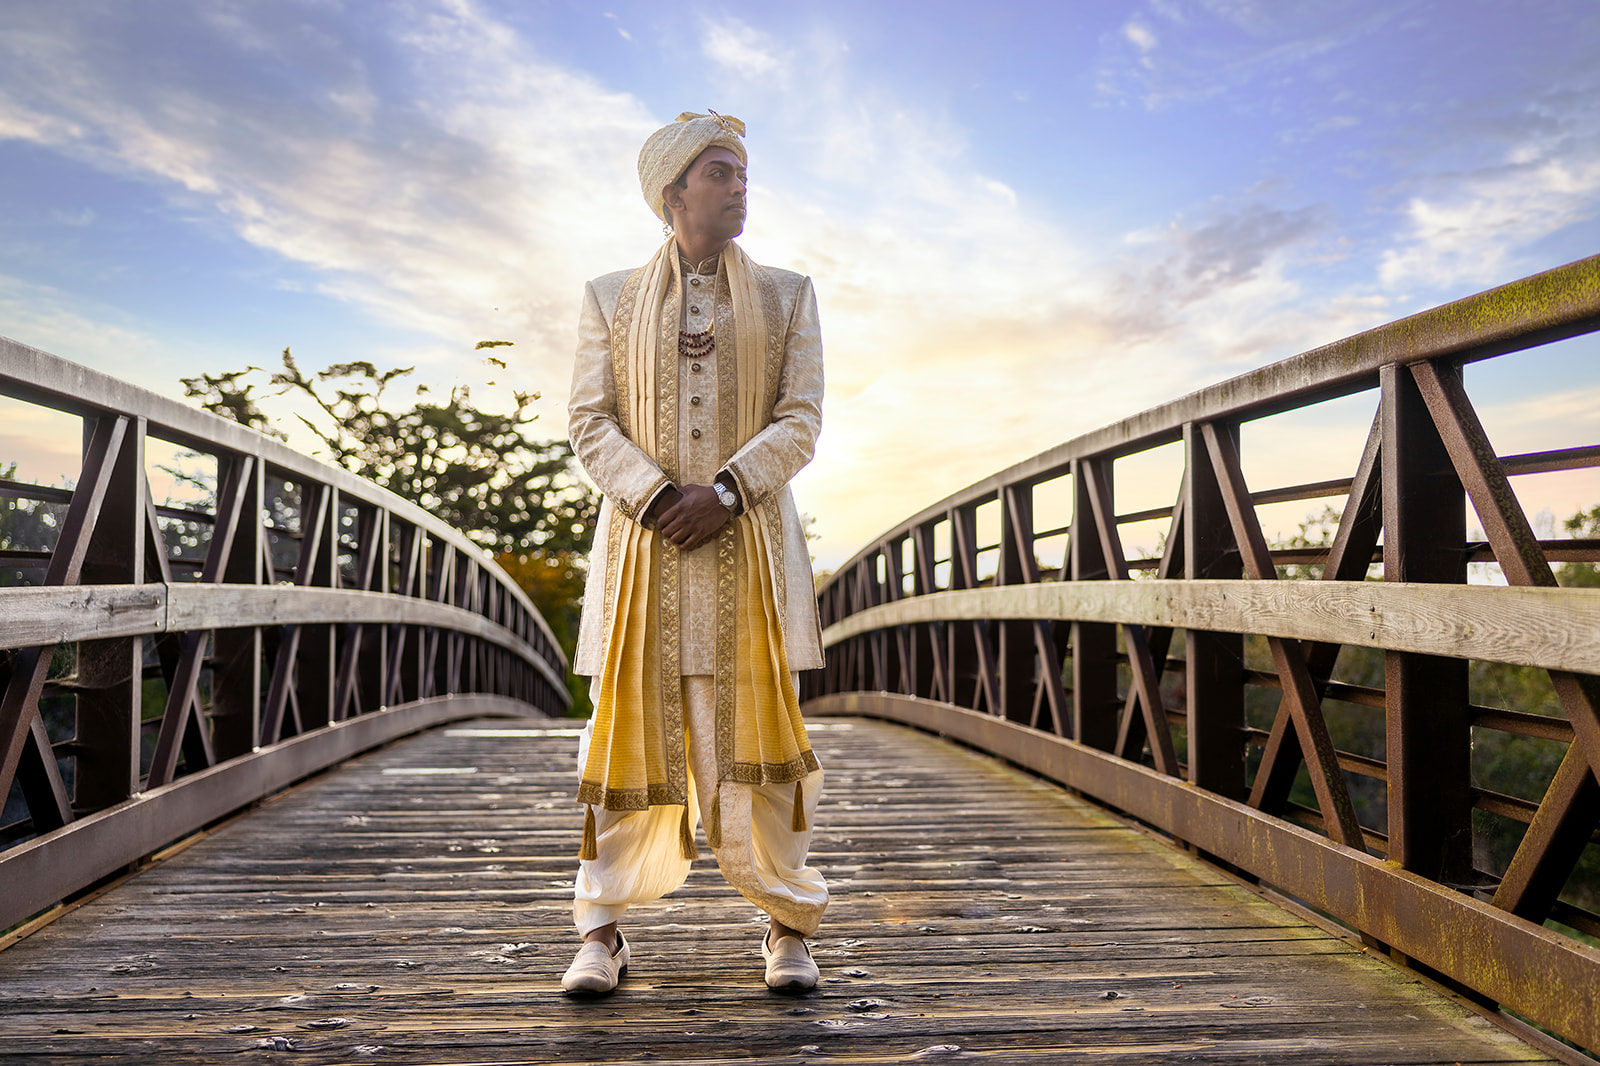 Groom poses on a bridge looking pensive with a dramatic sky in the background in the Bay area wedding venue.